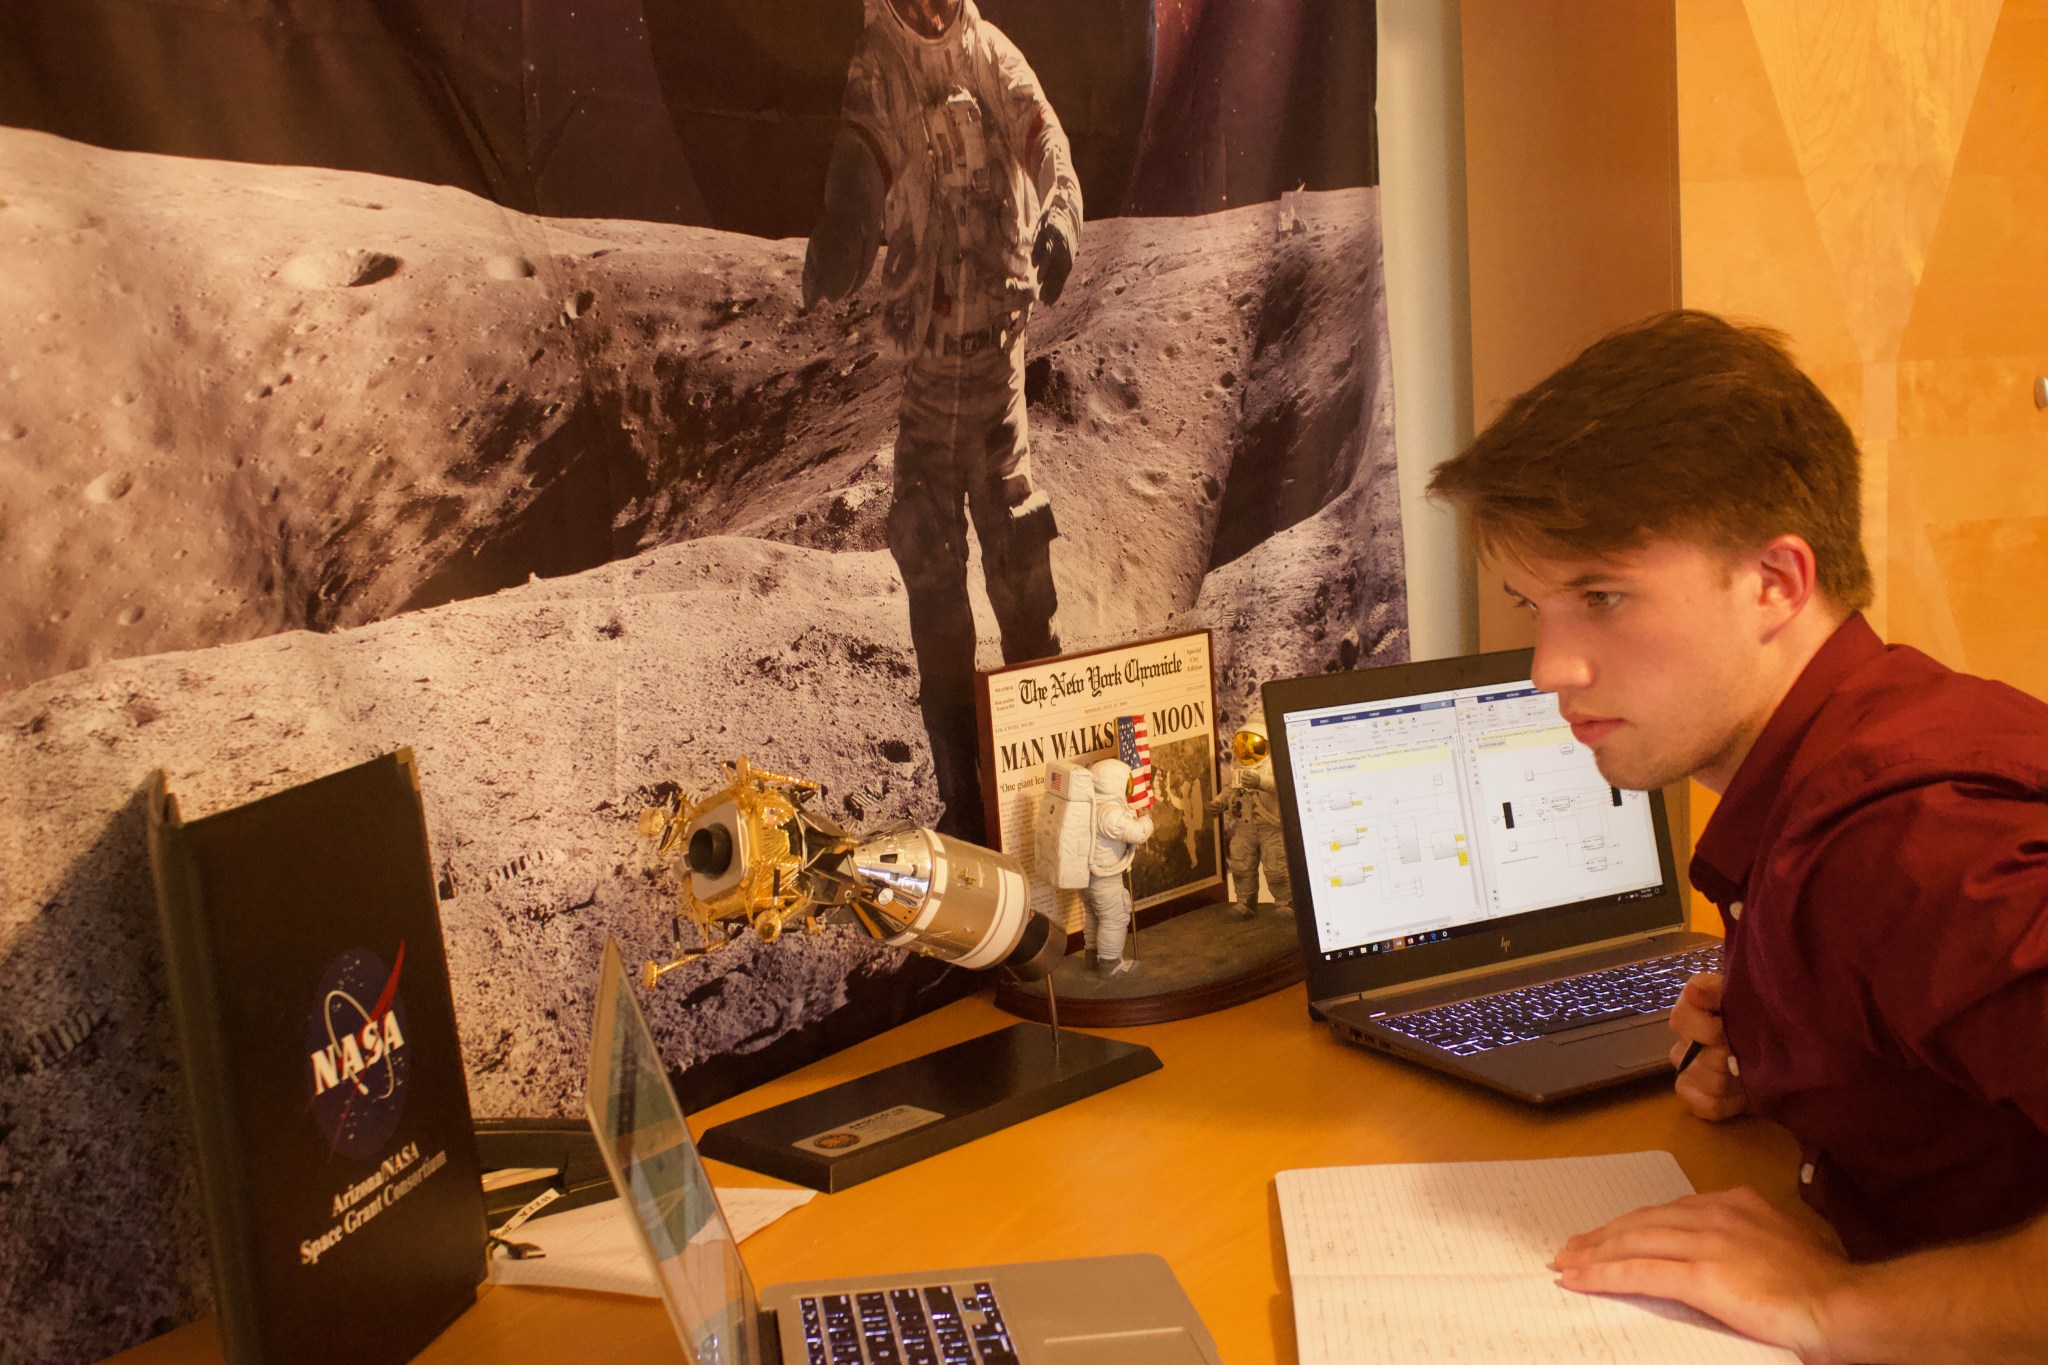 A college student looks at his computer while surrounded by NASA memorabilia.